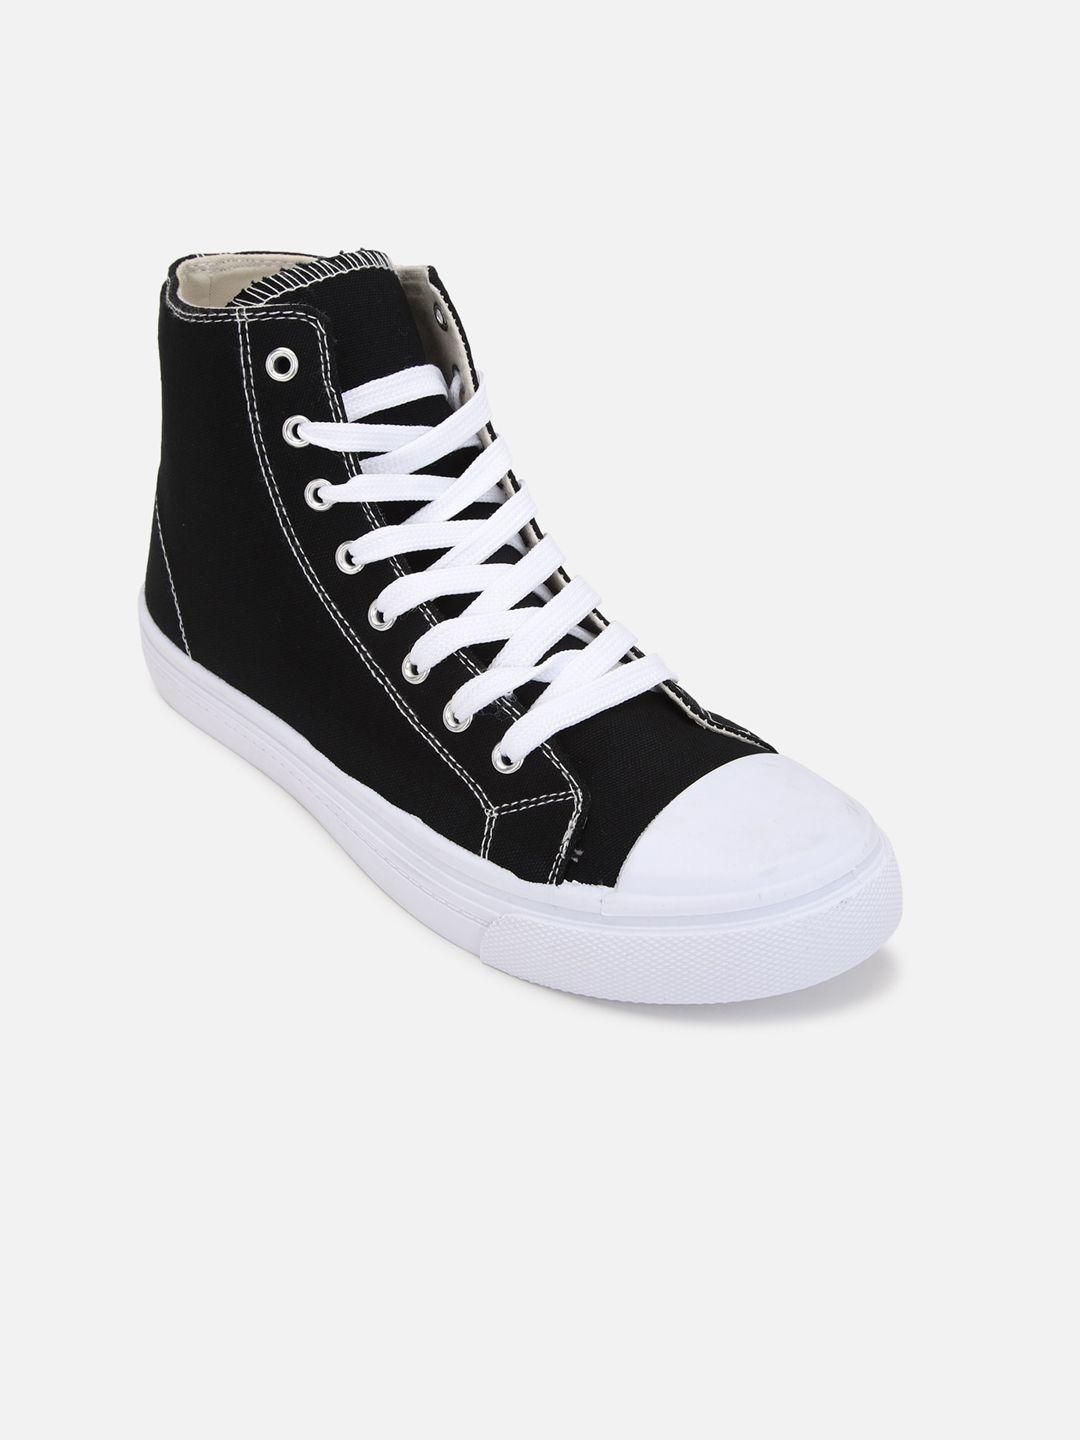 forever-21-women-colourblocked-high-top-sneakers